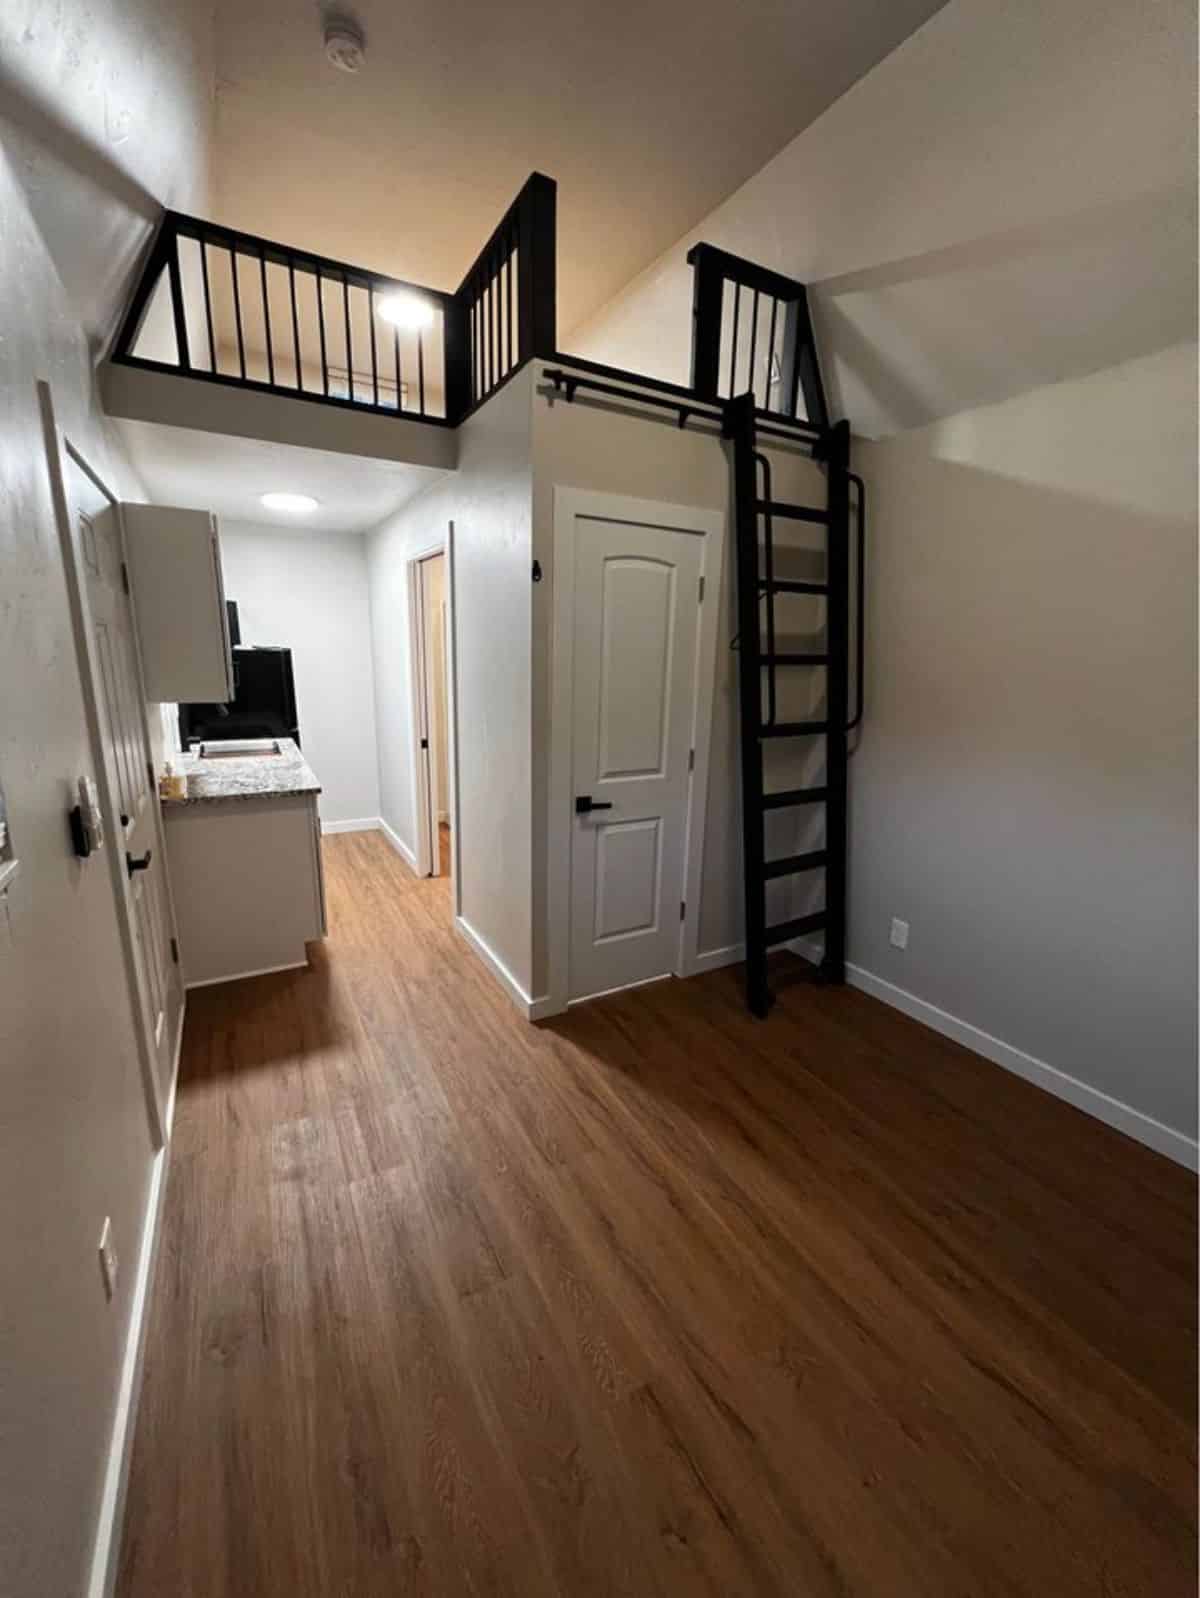 Ladder leading to the loft bedroom area